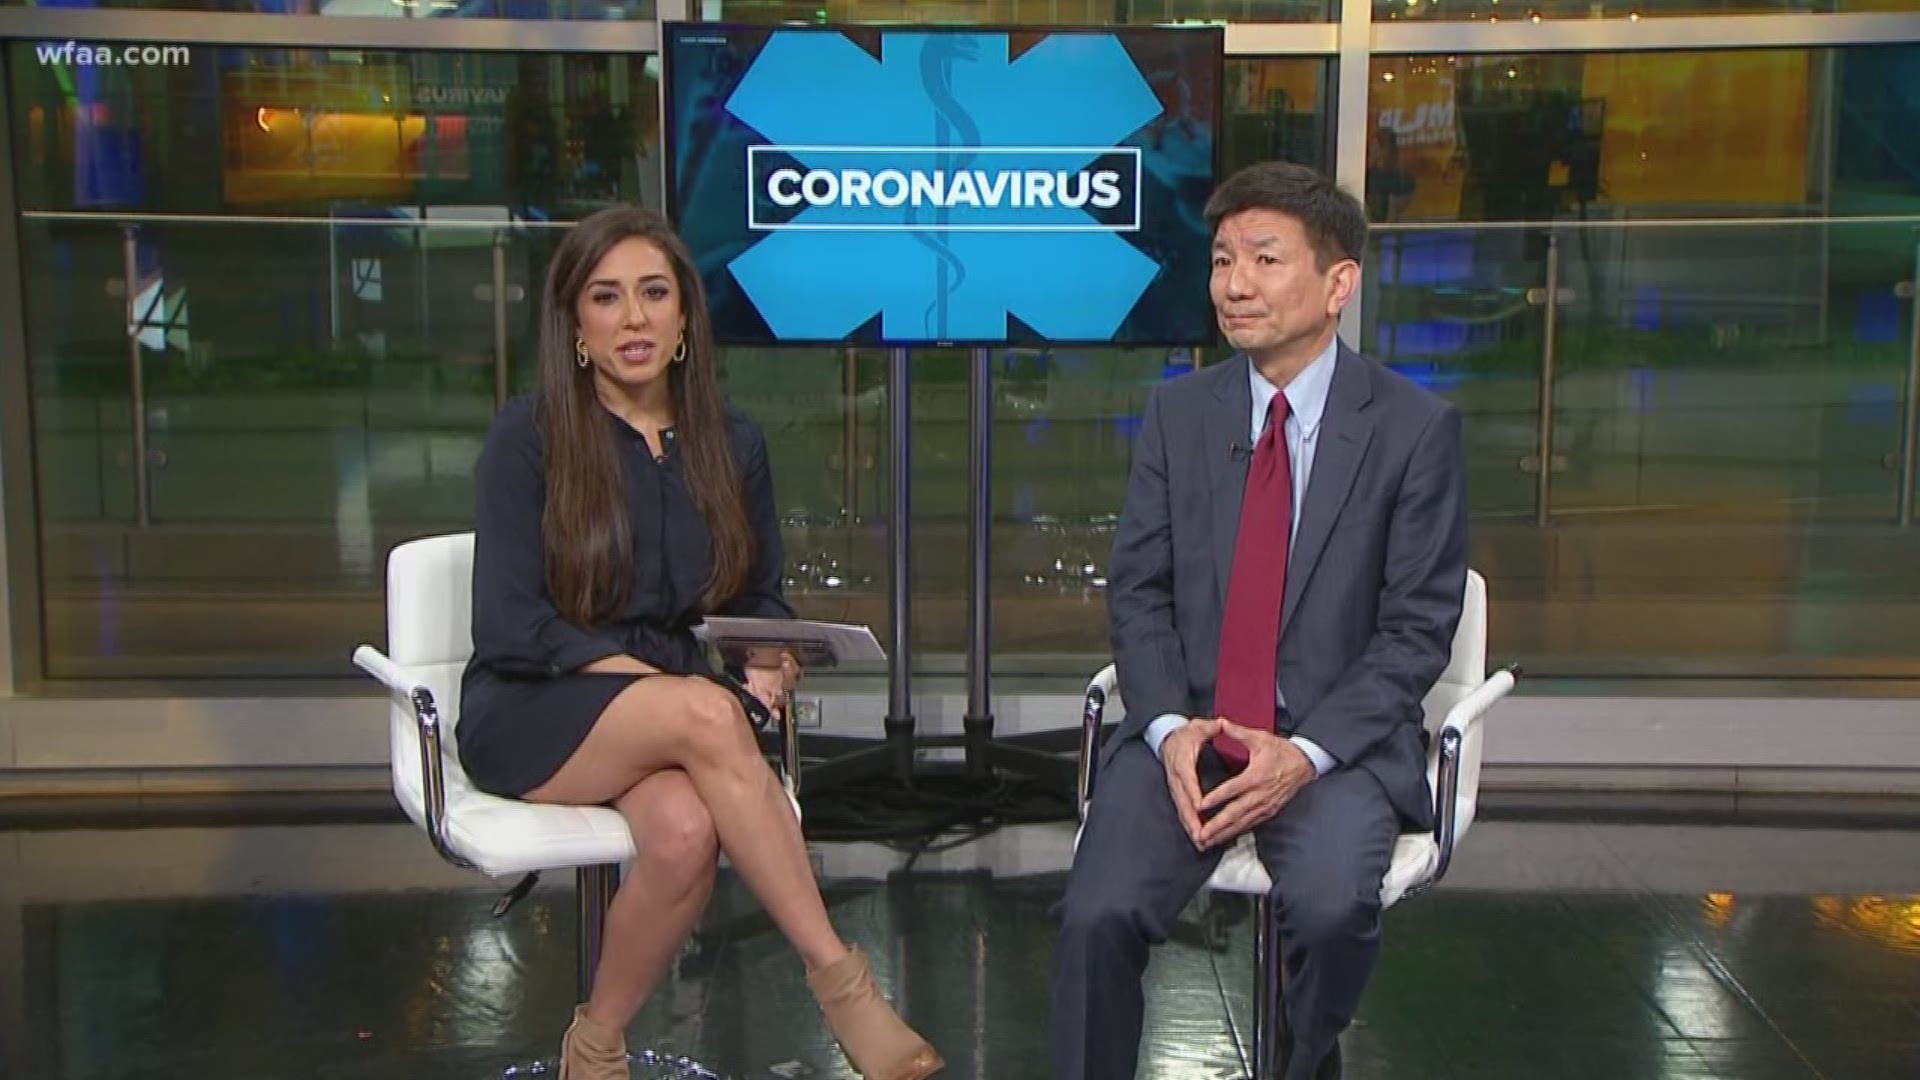 Dr. Philip Huang, the director of Dallas County Health and Human Services, joined WFAA's Sonia Azad in the studio to discuss the COVID-19 cases in the area.